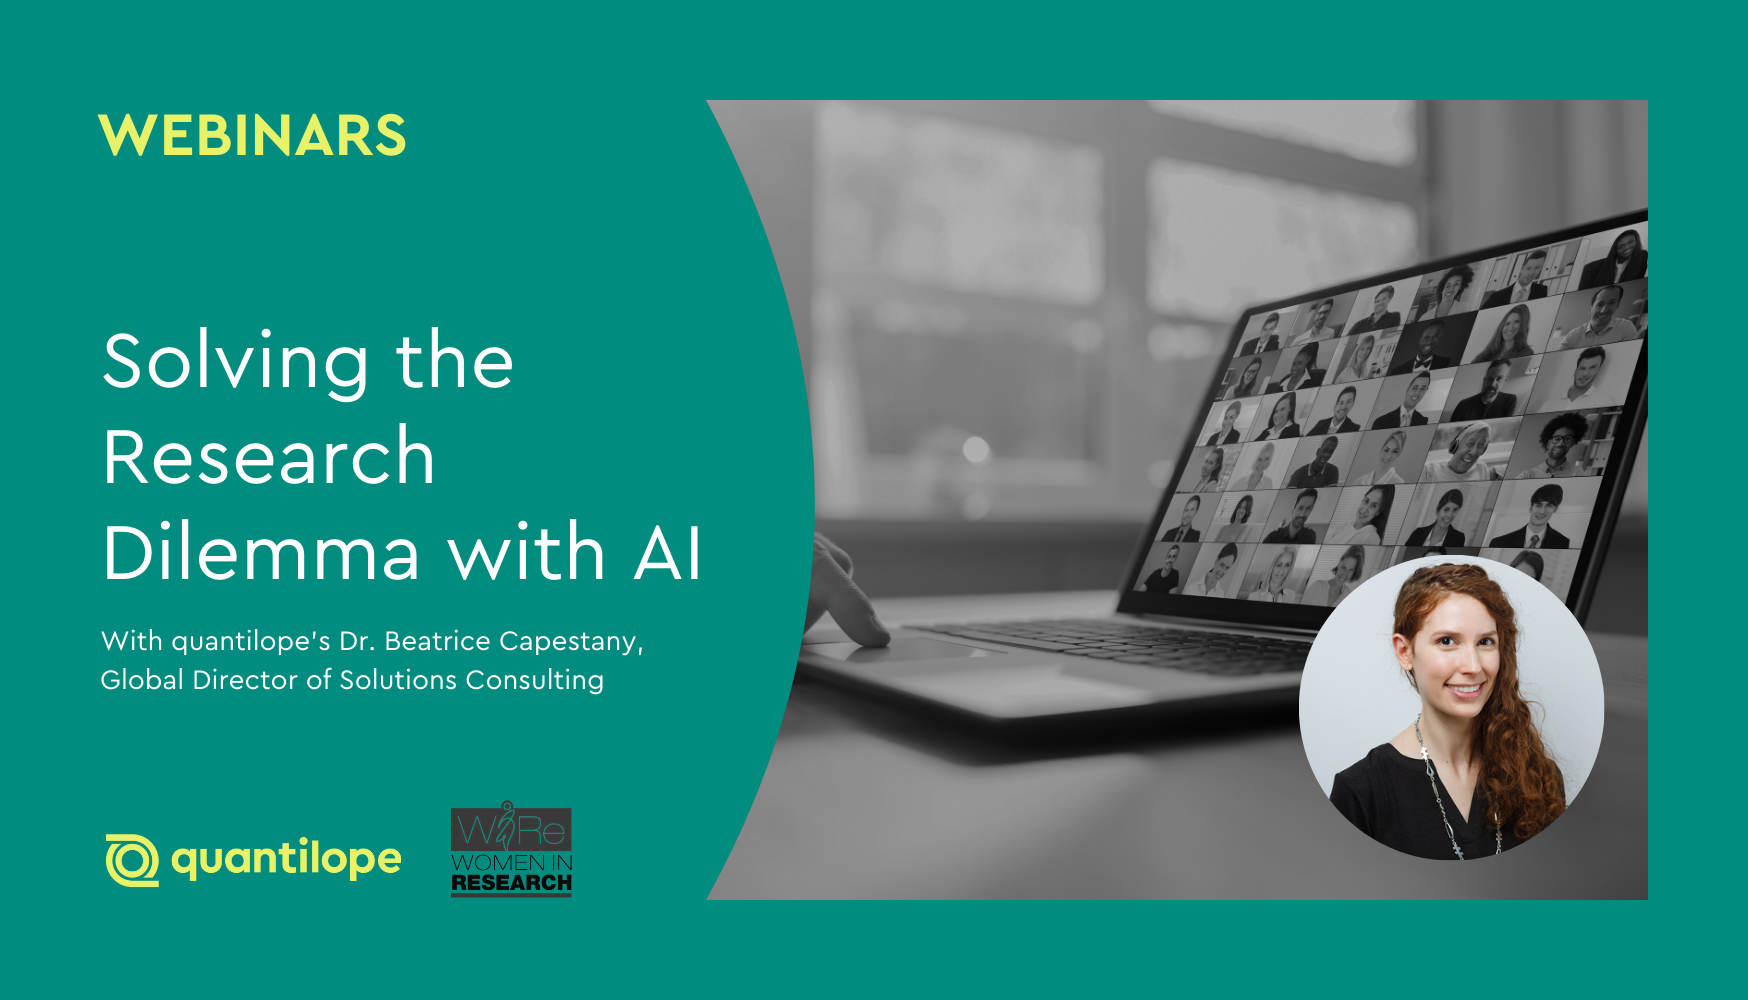 quantilope & WIRe Webinar: Solving the Research Dilemma with AI